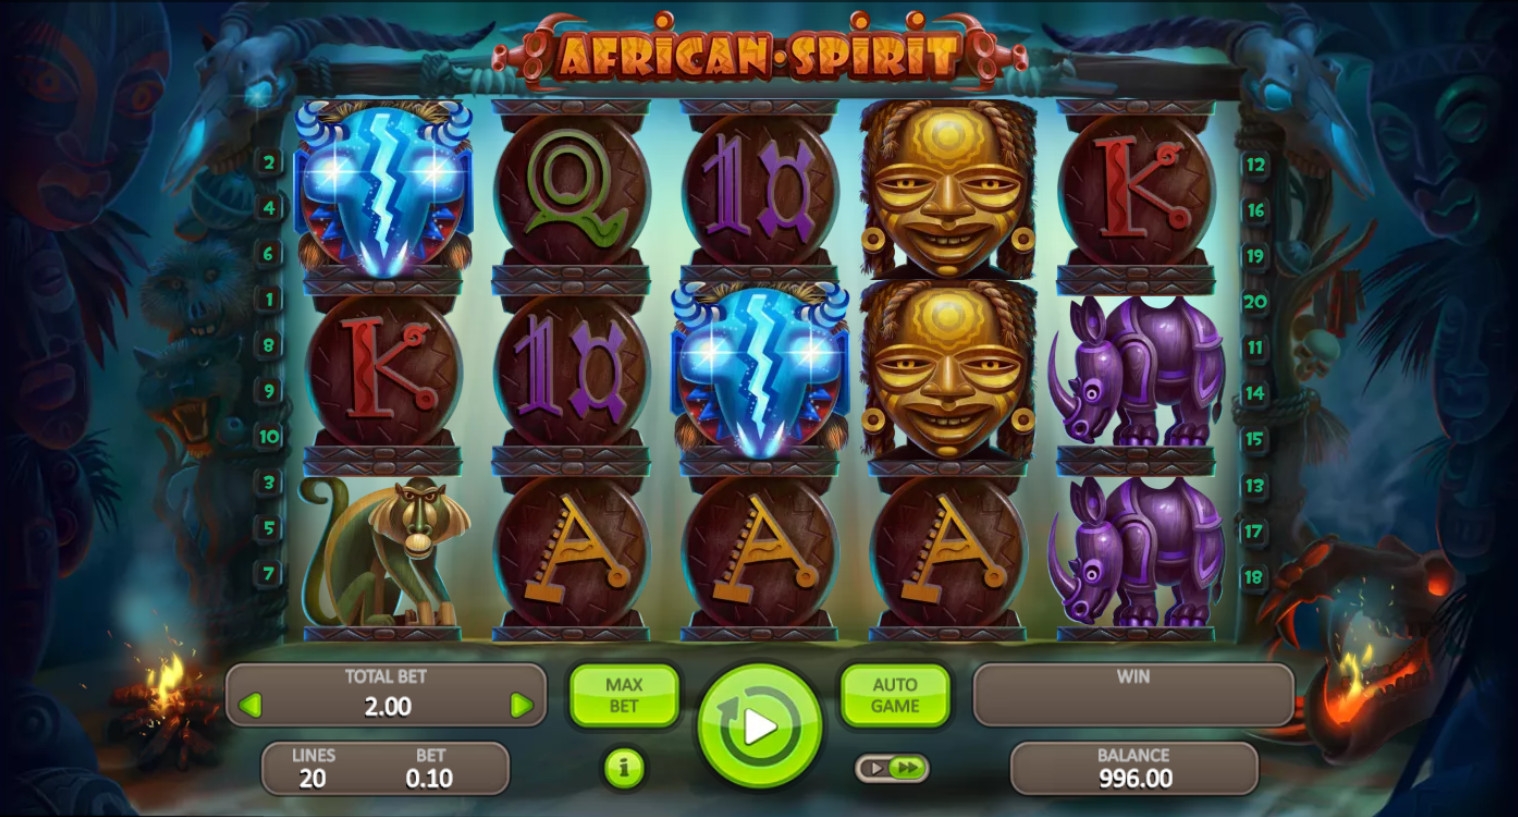 African Spirit (African Spirit) from category Slots